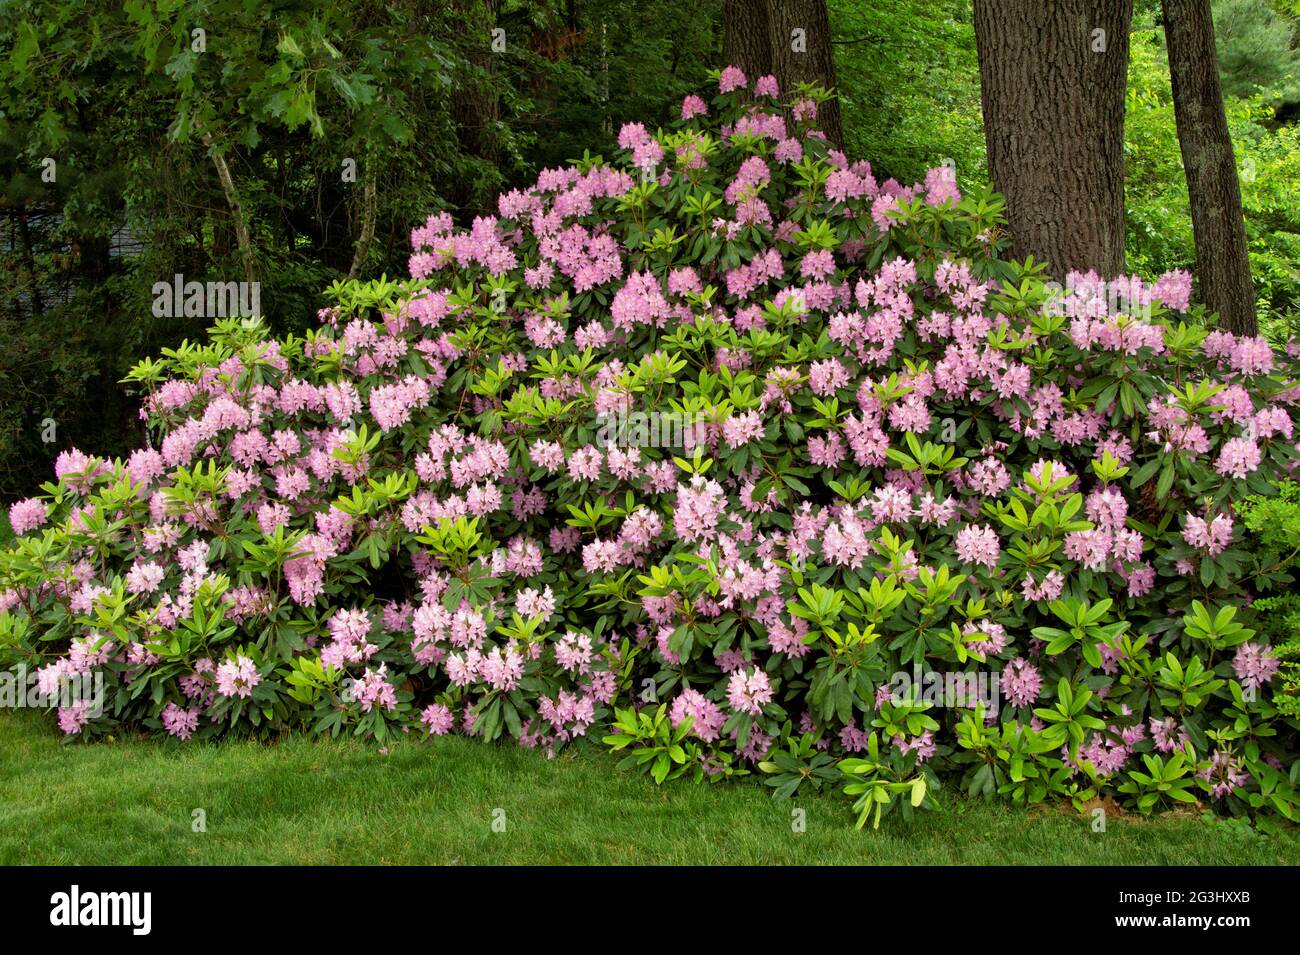 Very large evergreen Rhododendron shrub (Rhododendron maximum) in full summer bloom with numerous clusters of pink blossoms among bright green leaves. Stock Photo